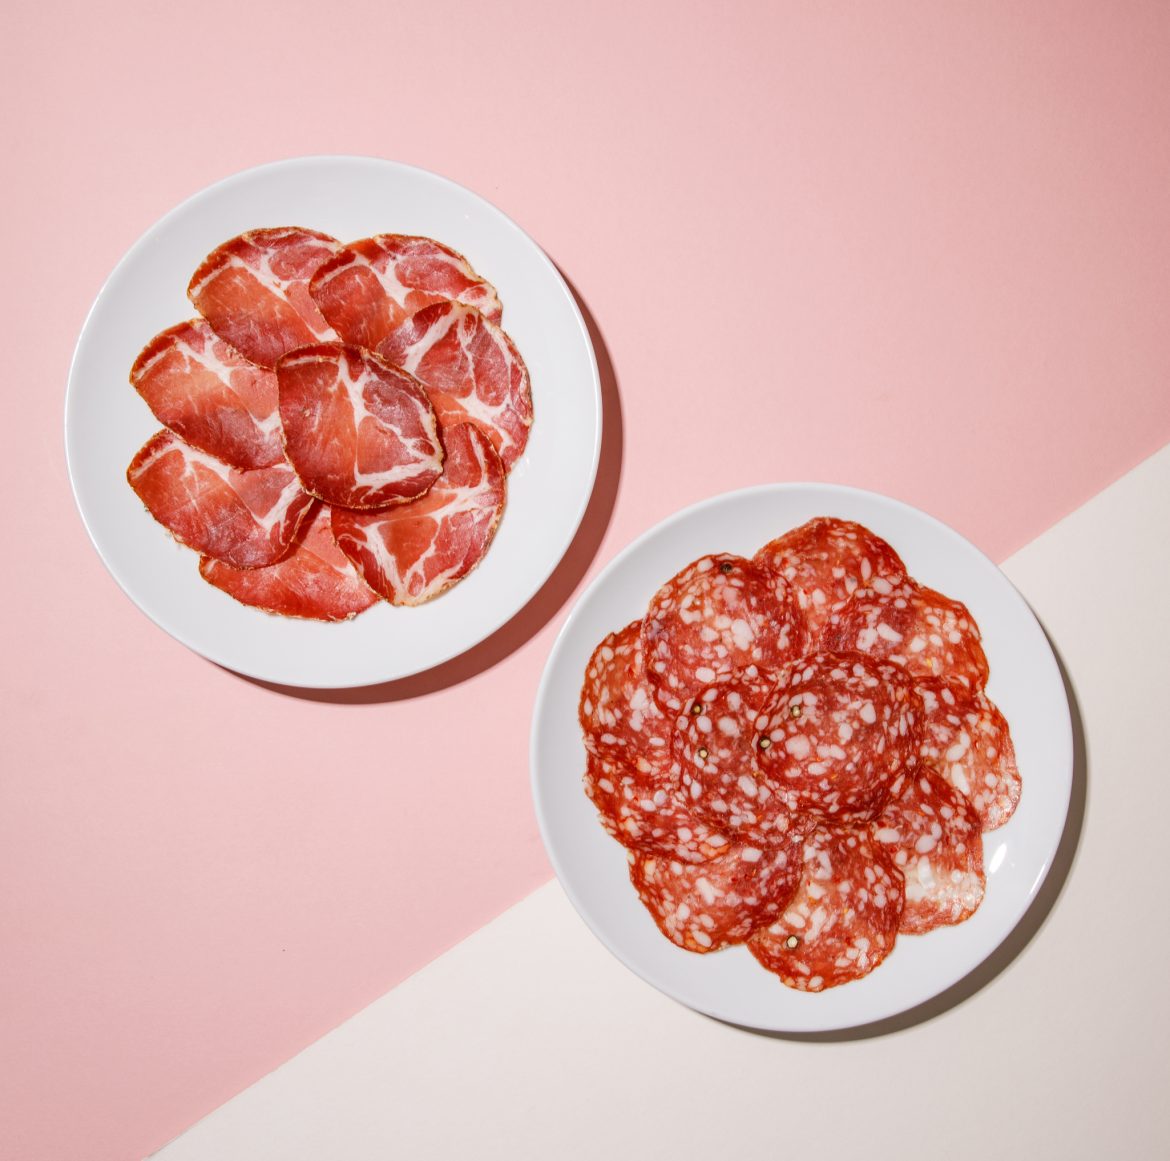 photograph of two plates of cured meats from above. One plate is gabagool, one plate is salami